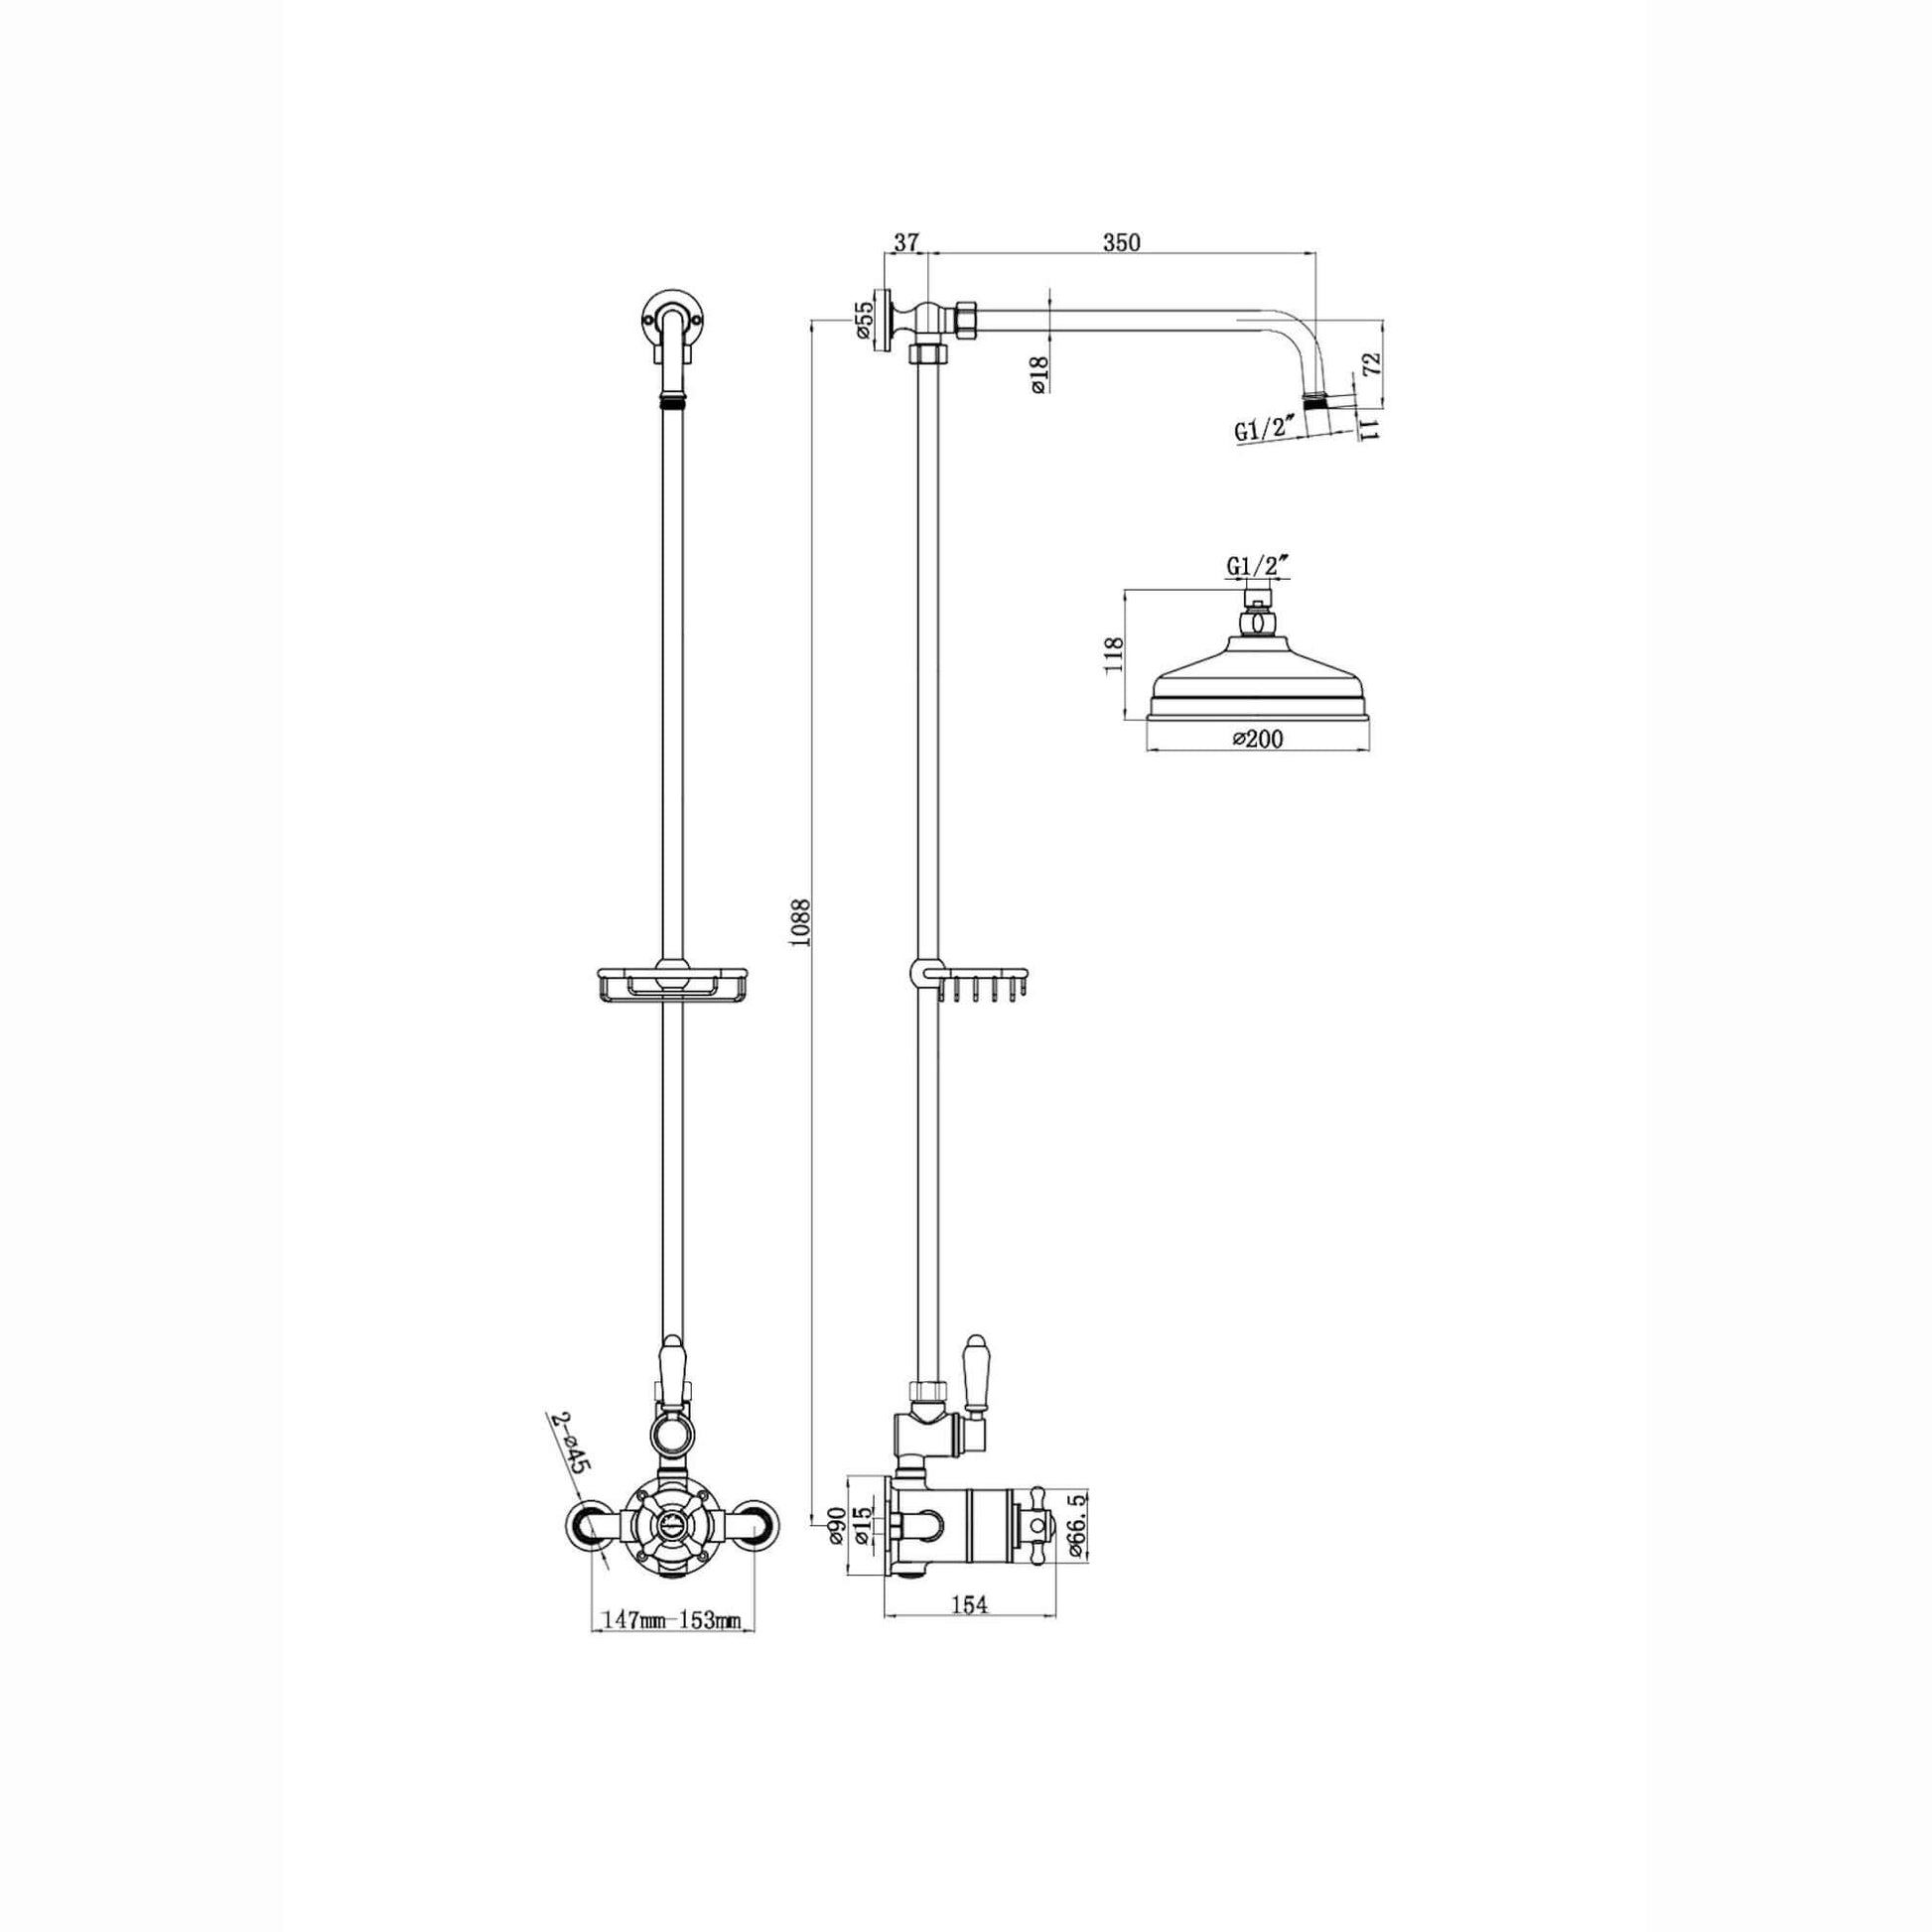 Downton Exposed Traditional Thermostatic Shower Set Single Outlet Incl. Twin Shower Valve, Rigid Riser Rail, 200mm Shower Head & Caddy - Antique Bronze And White - Showers